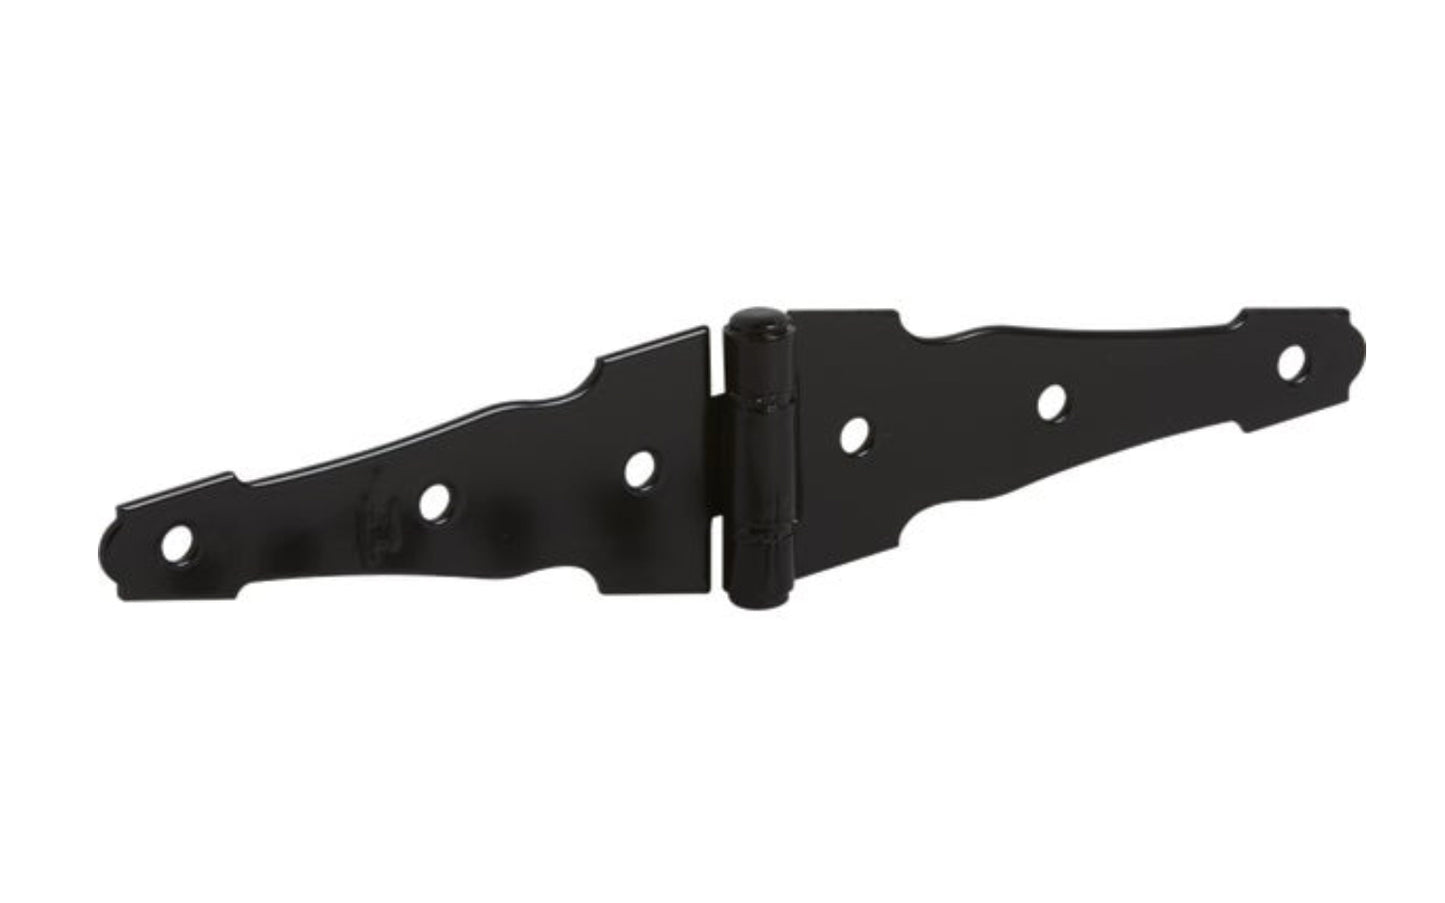 4" Black Finish Ornamental Strap Hinge ~ Designed for gates, sheds & rustic doors. Coated with "Weatherguard" protection to withstand harsh weather conditions & prevent corrosion. Sold as one hinge in pack. National Hardware Catalog Model No. N109-036.